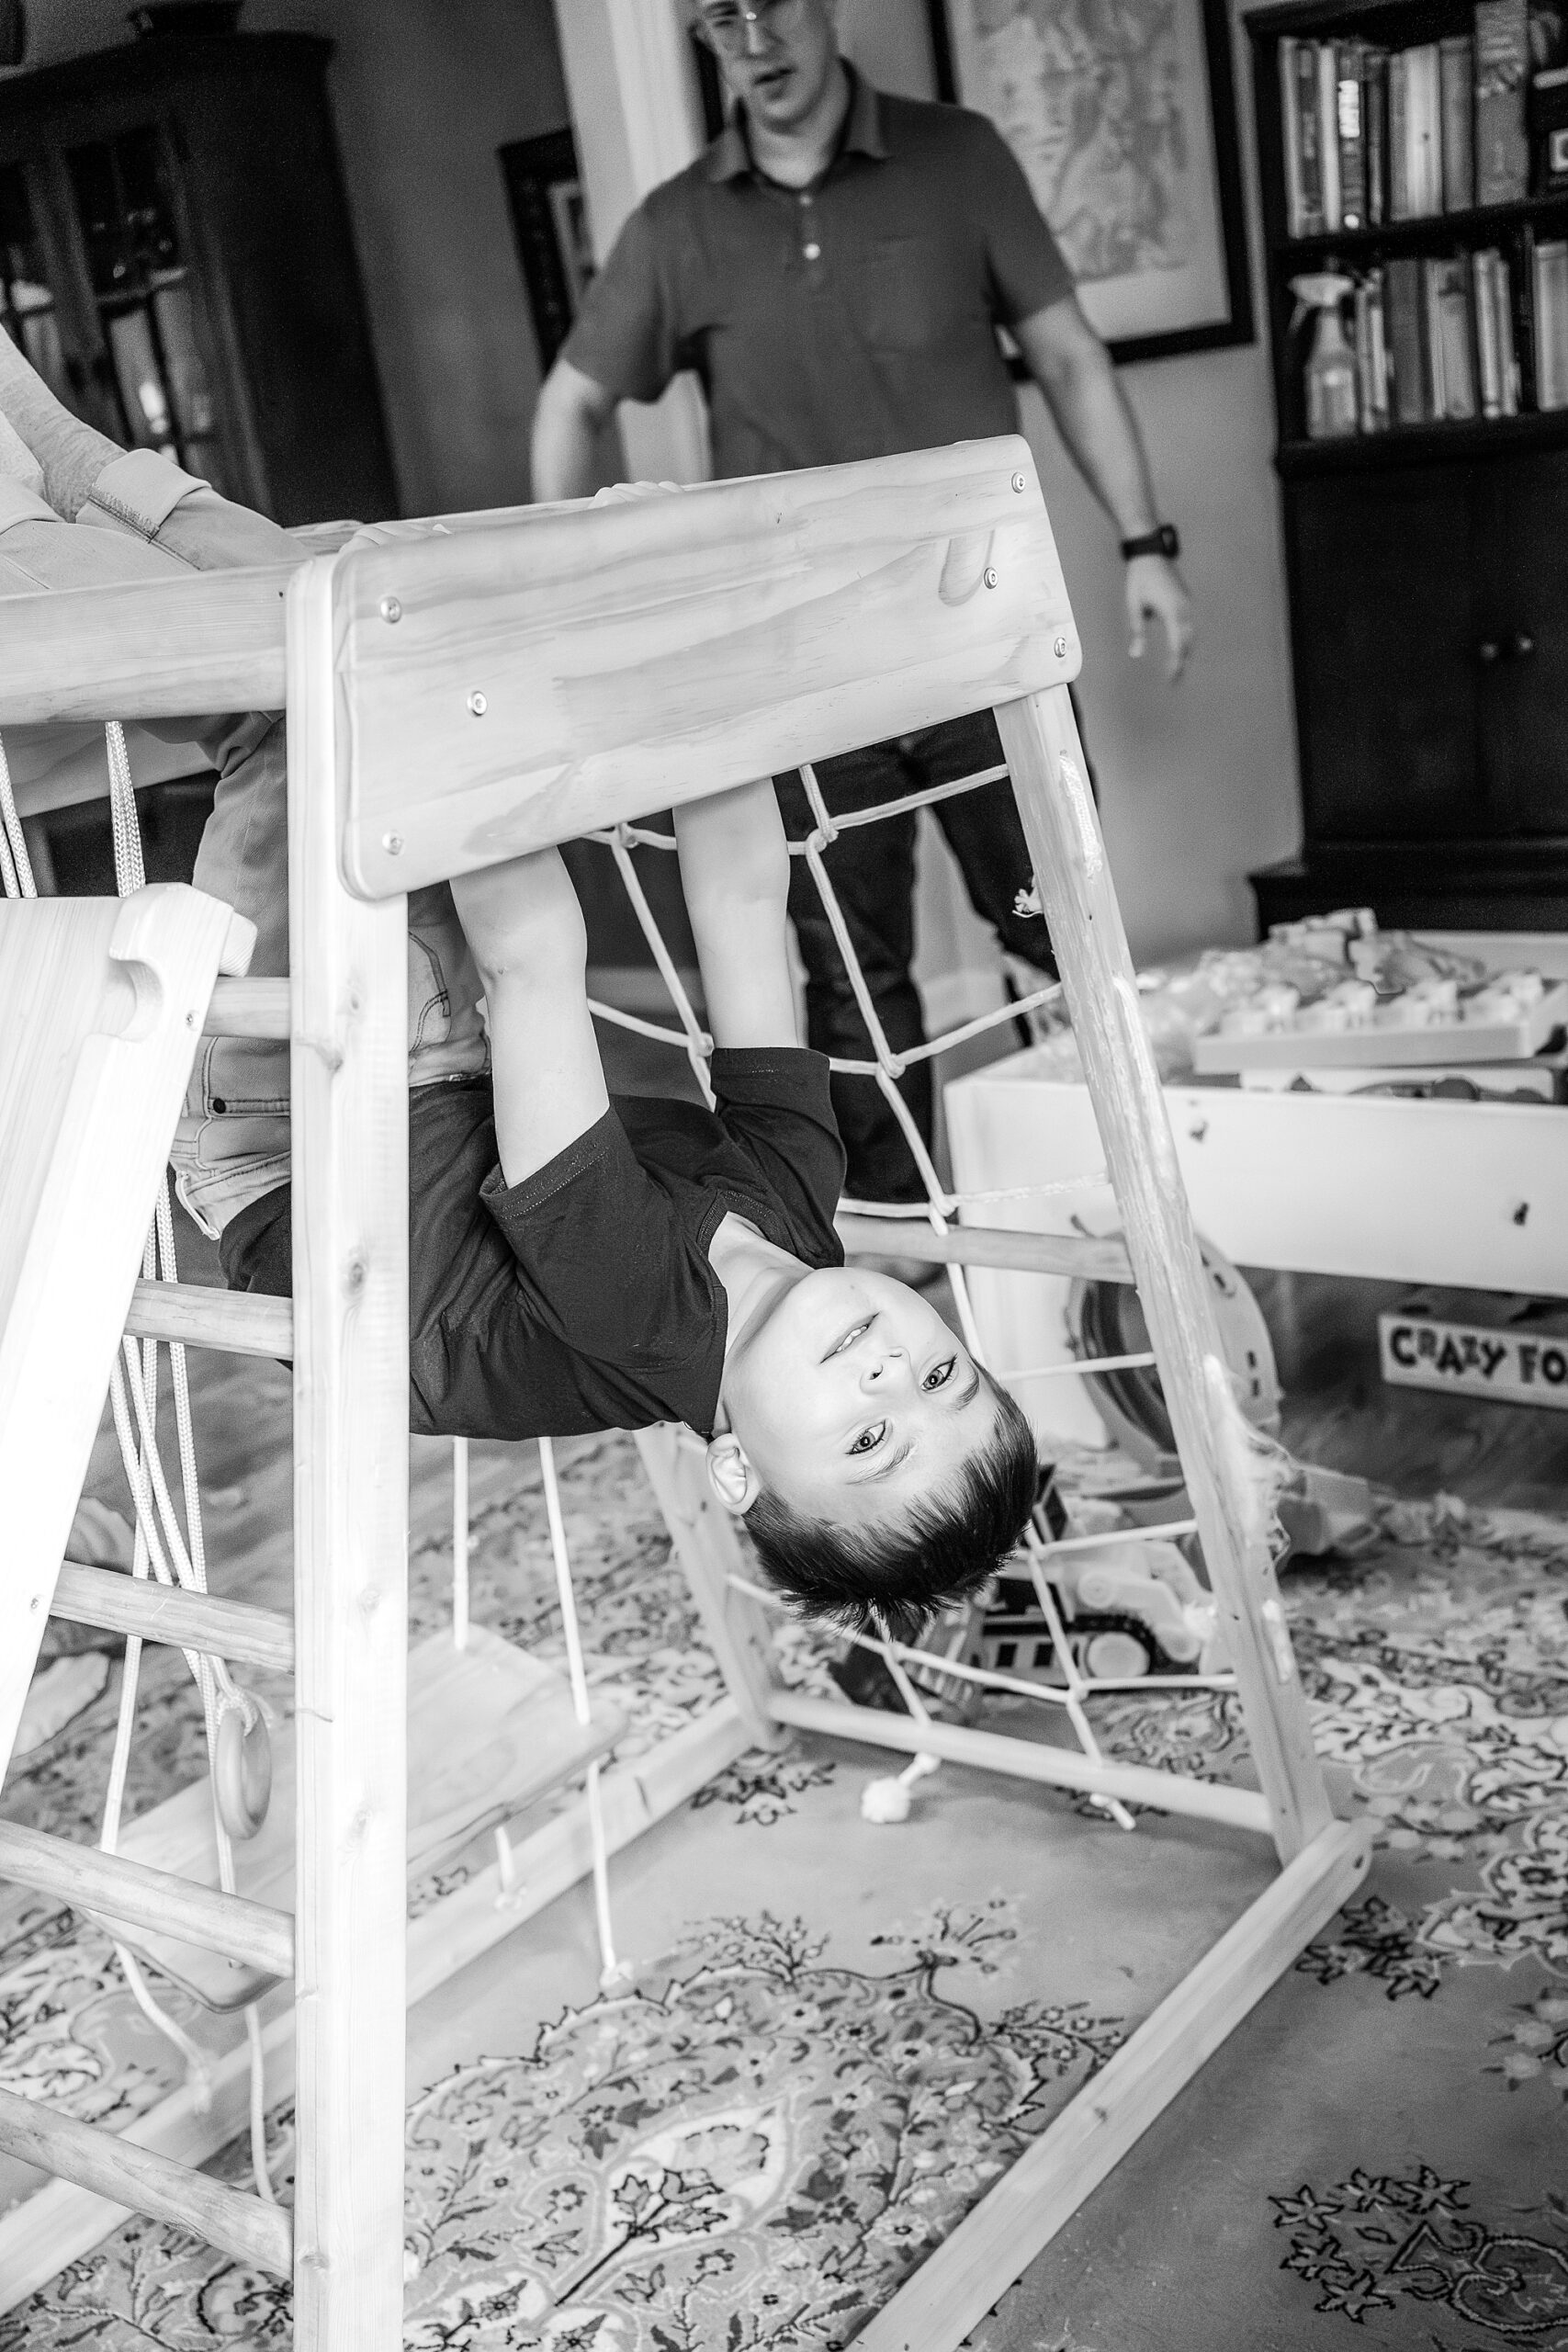 Child playfully hanging upside down from a wooden chair as an adult watches.